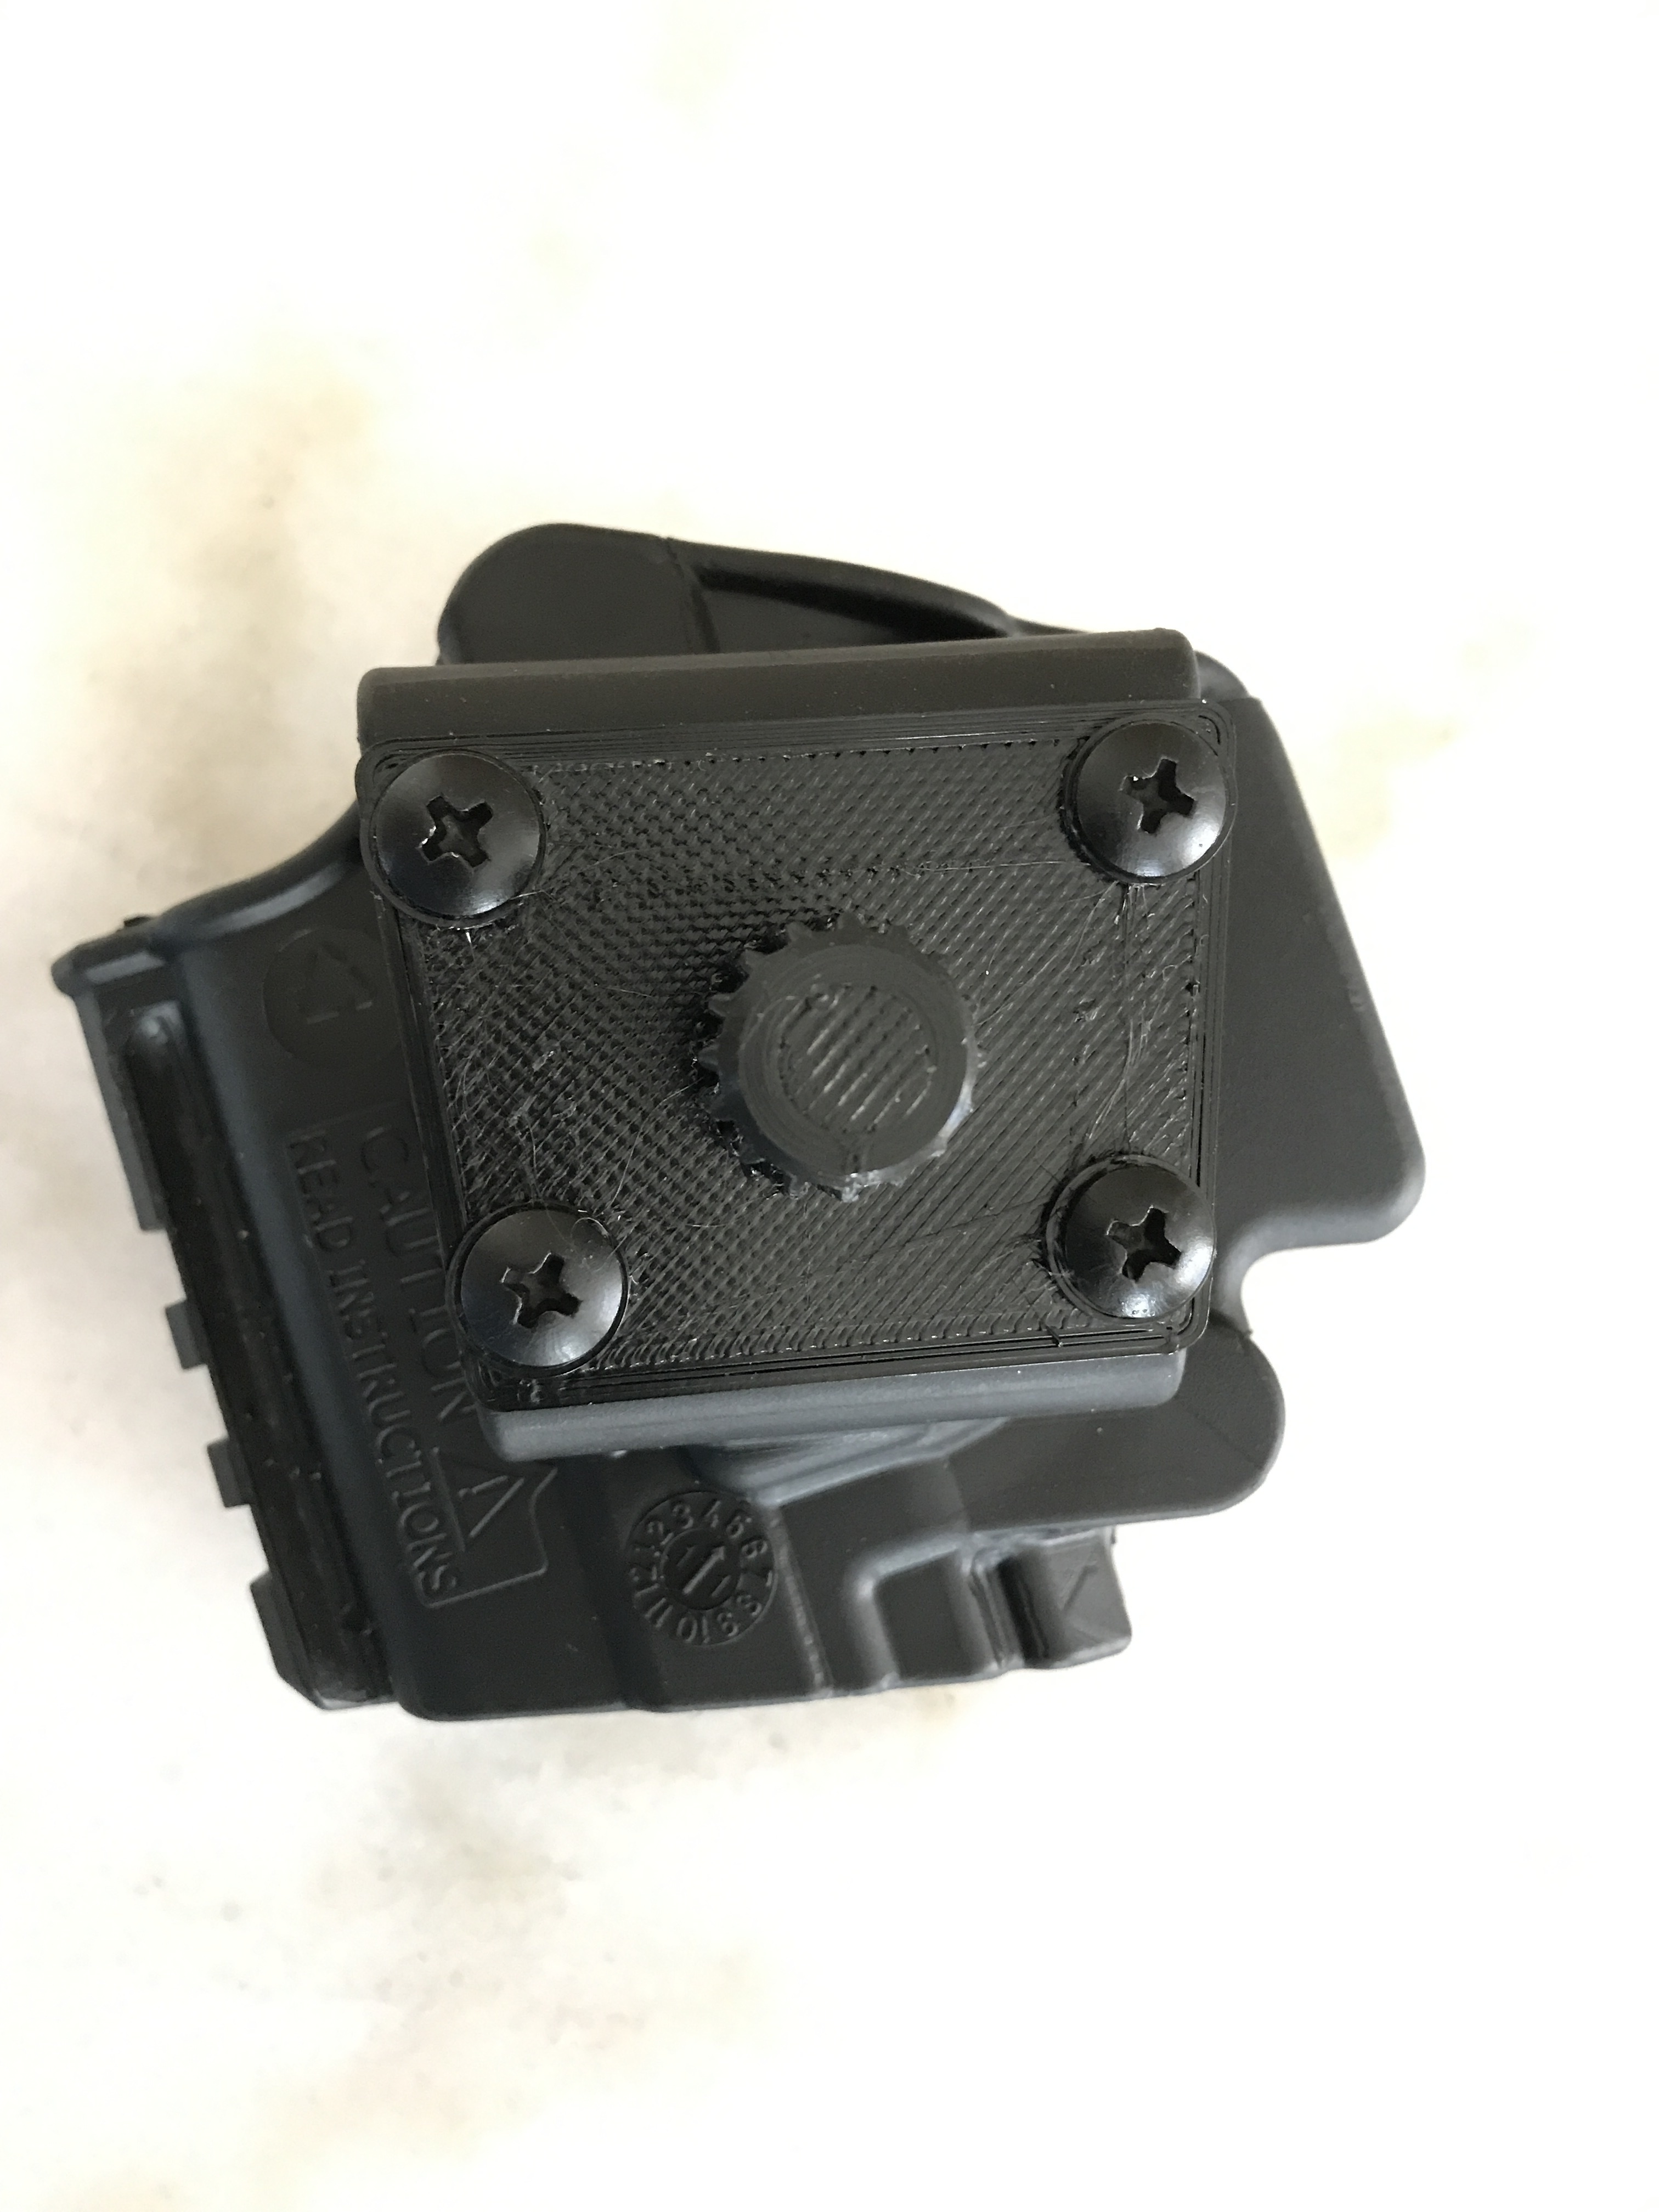 XD holster adapter for Alien holster products